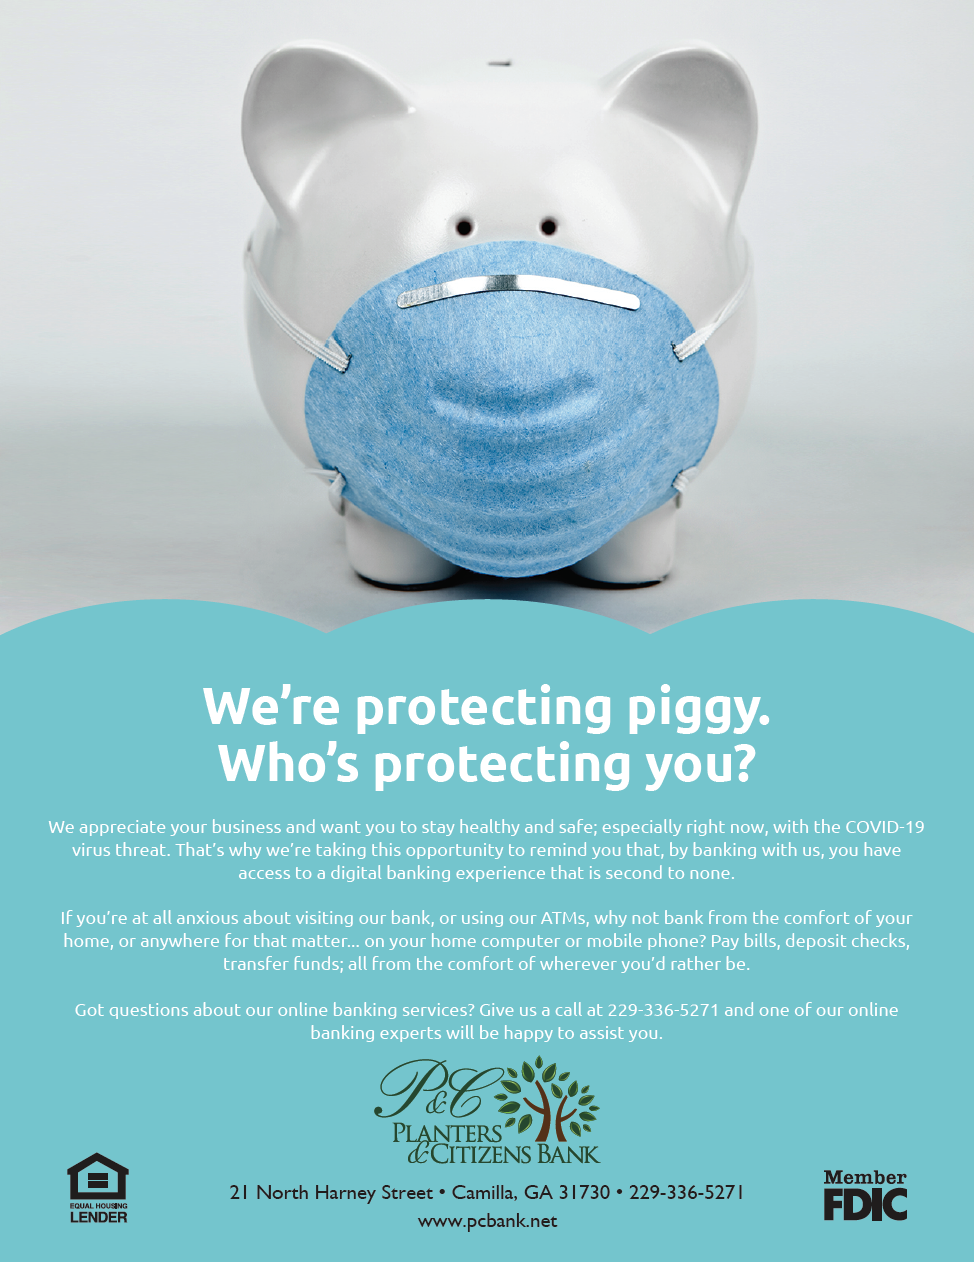 We're protecting Piggy, who's protecting you?